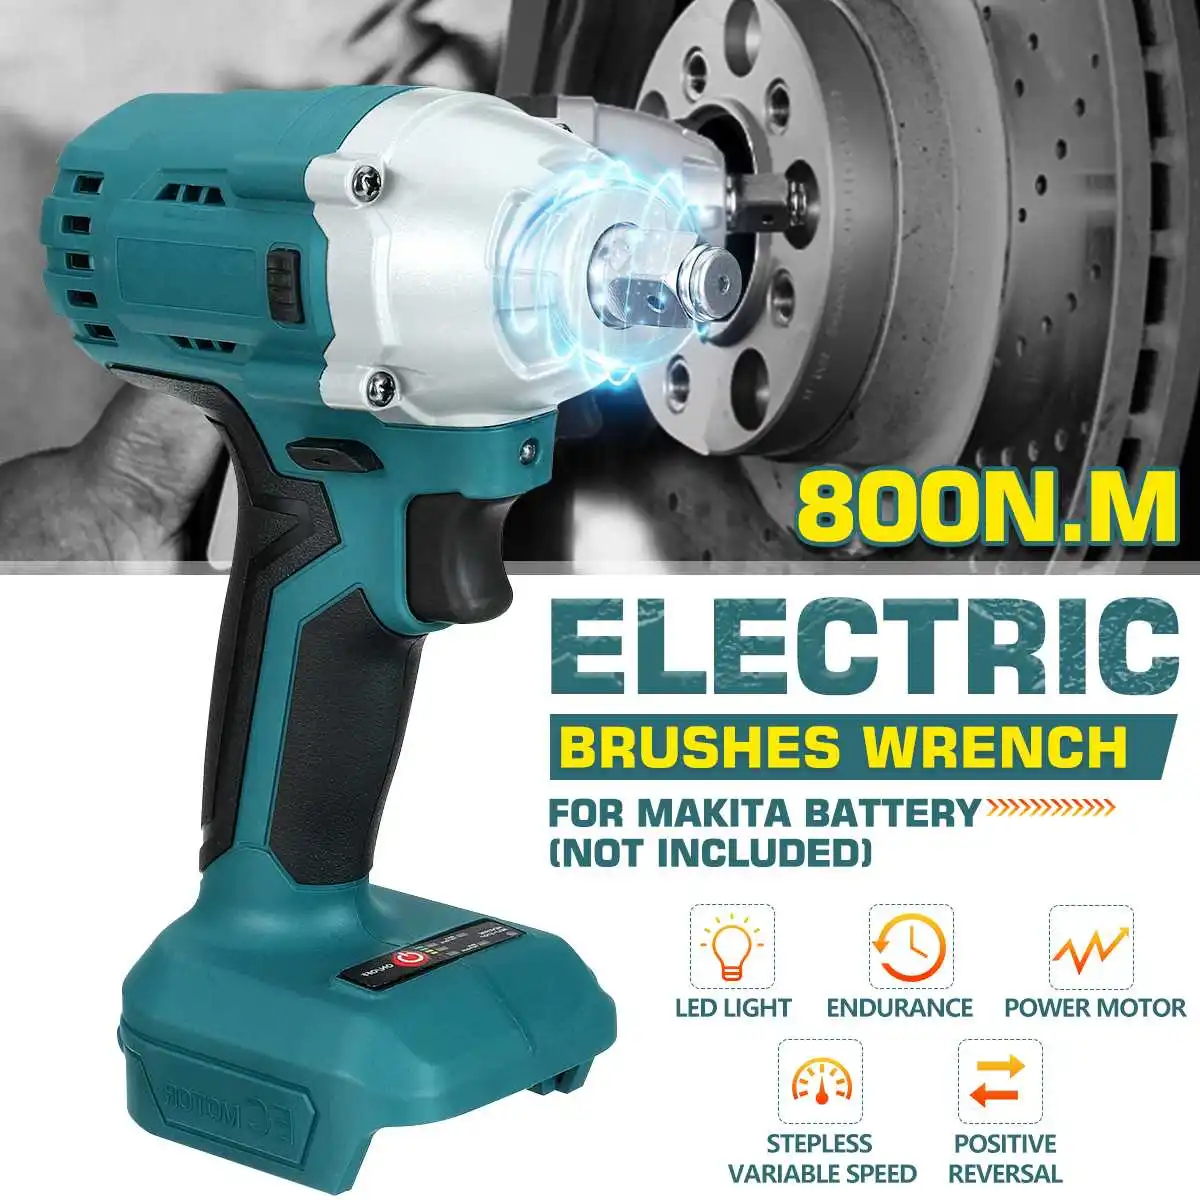 18V 800N m Brushless Impact Electric Wrench Screwdriver Rechargeable 1 2 Socket Wrench Power Tools Cordless